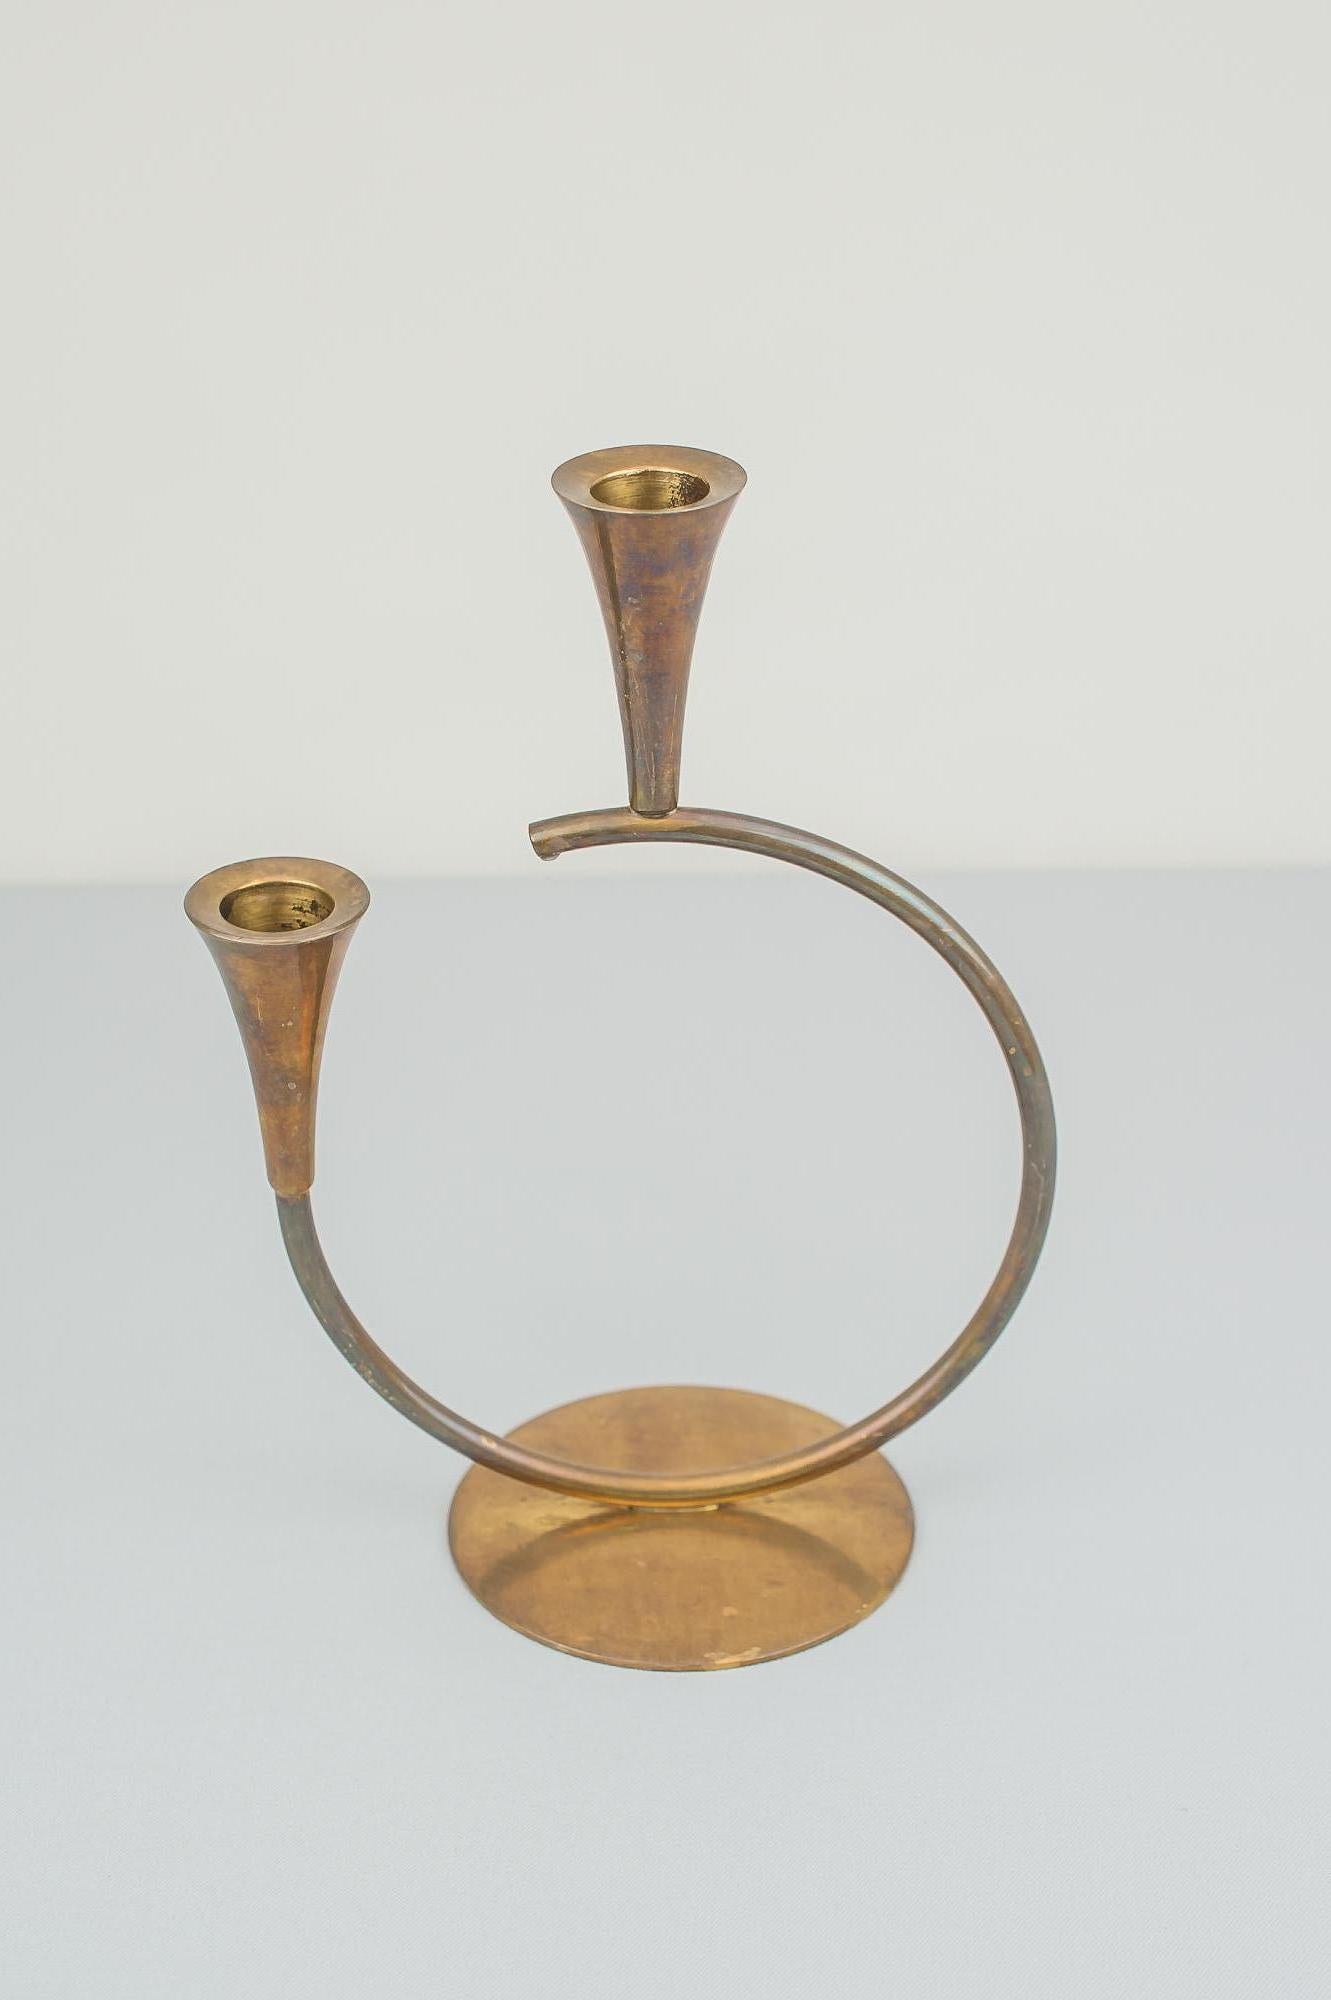 Candleholder by Richard Rohac (signed)
Original condition.